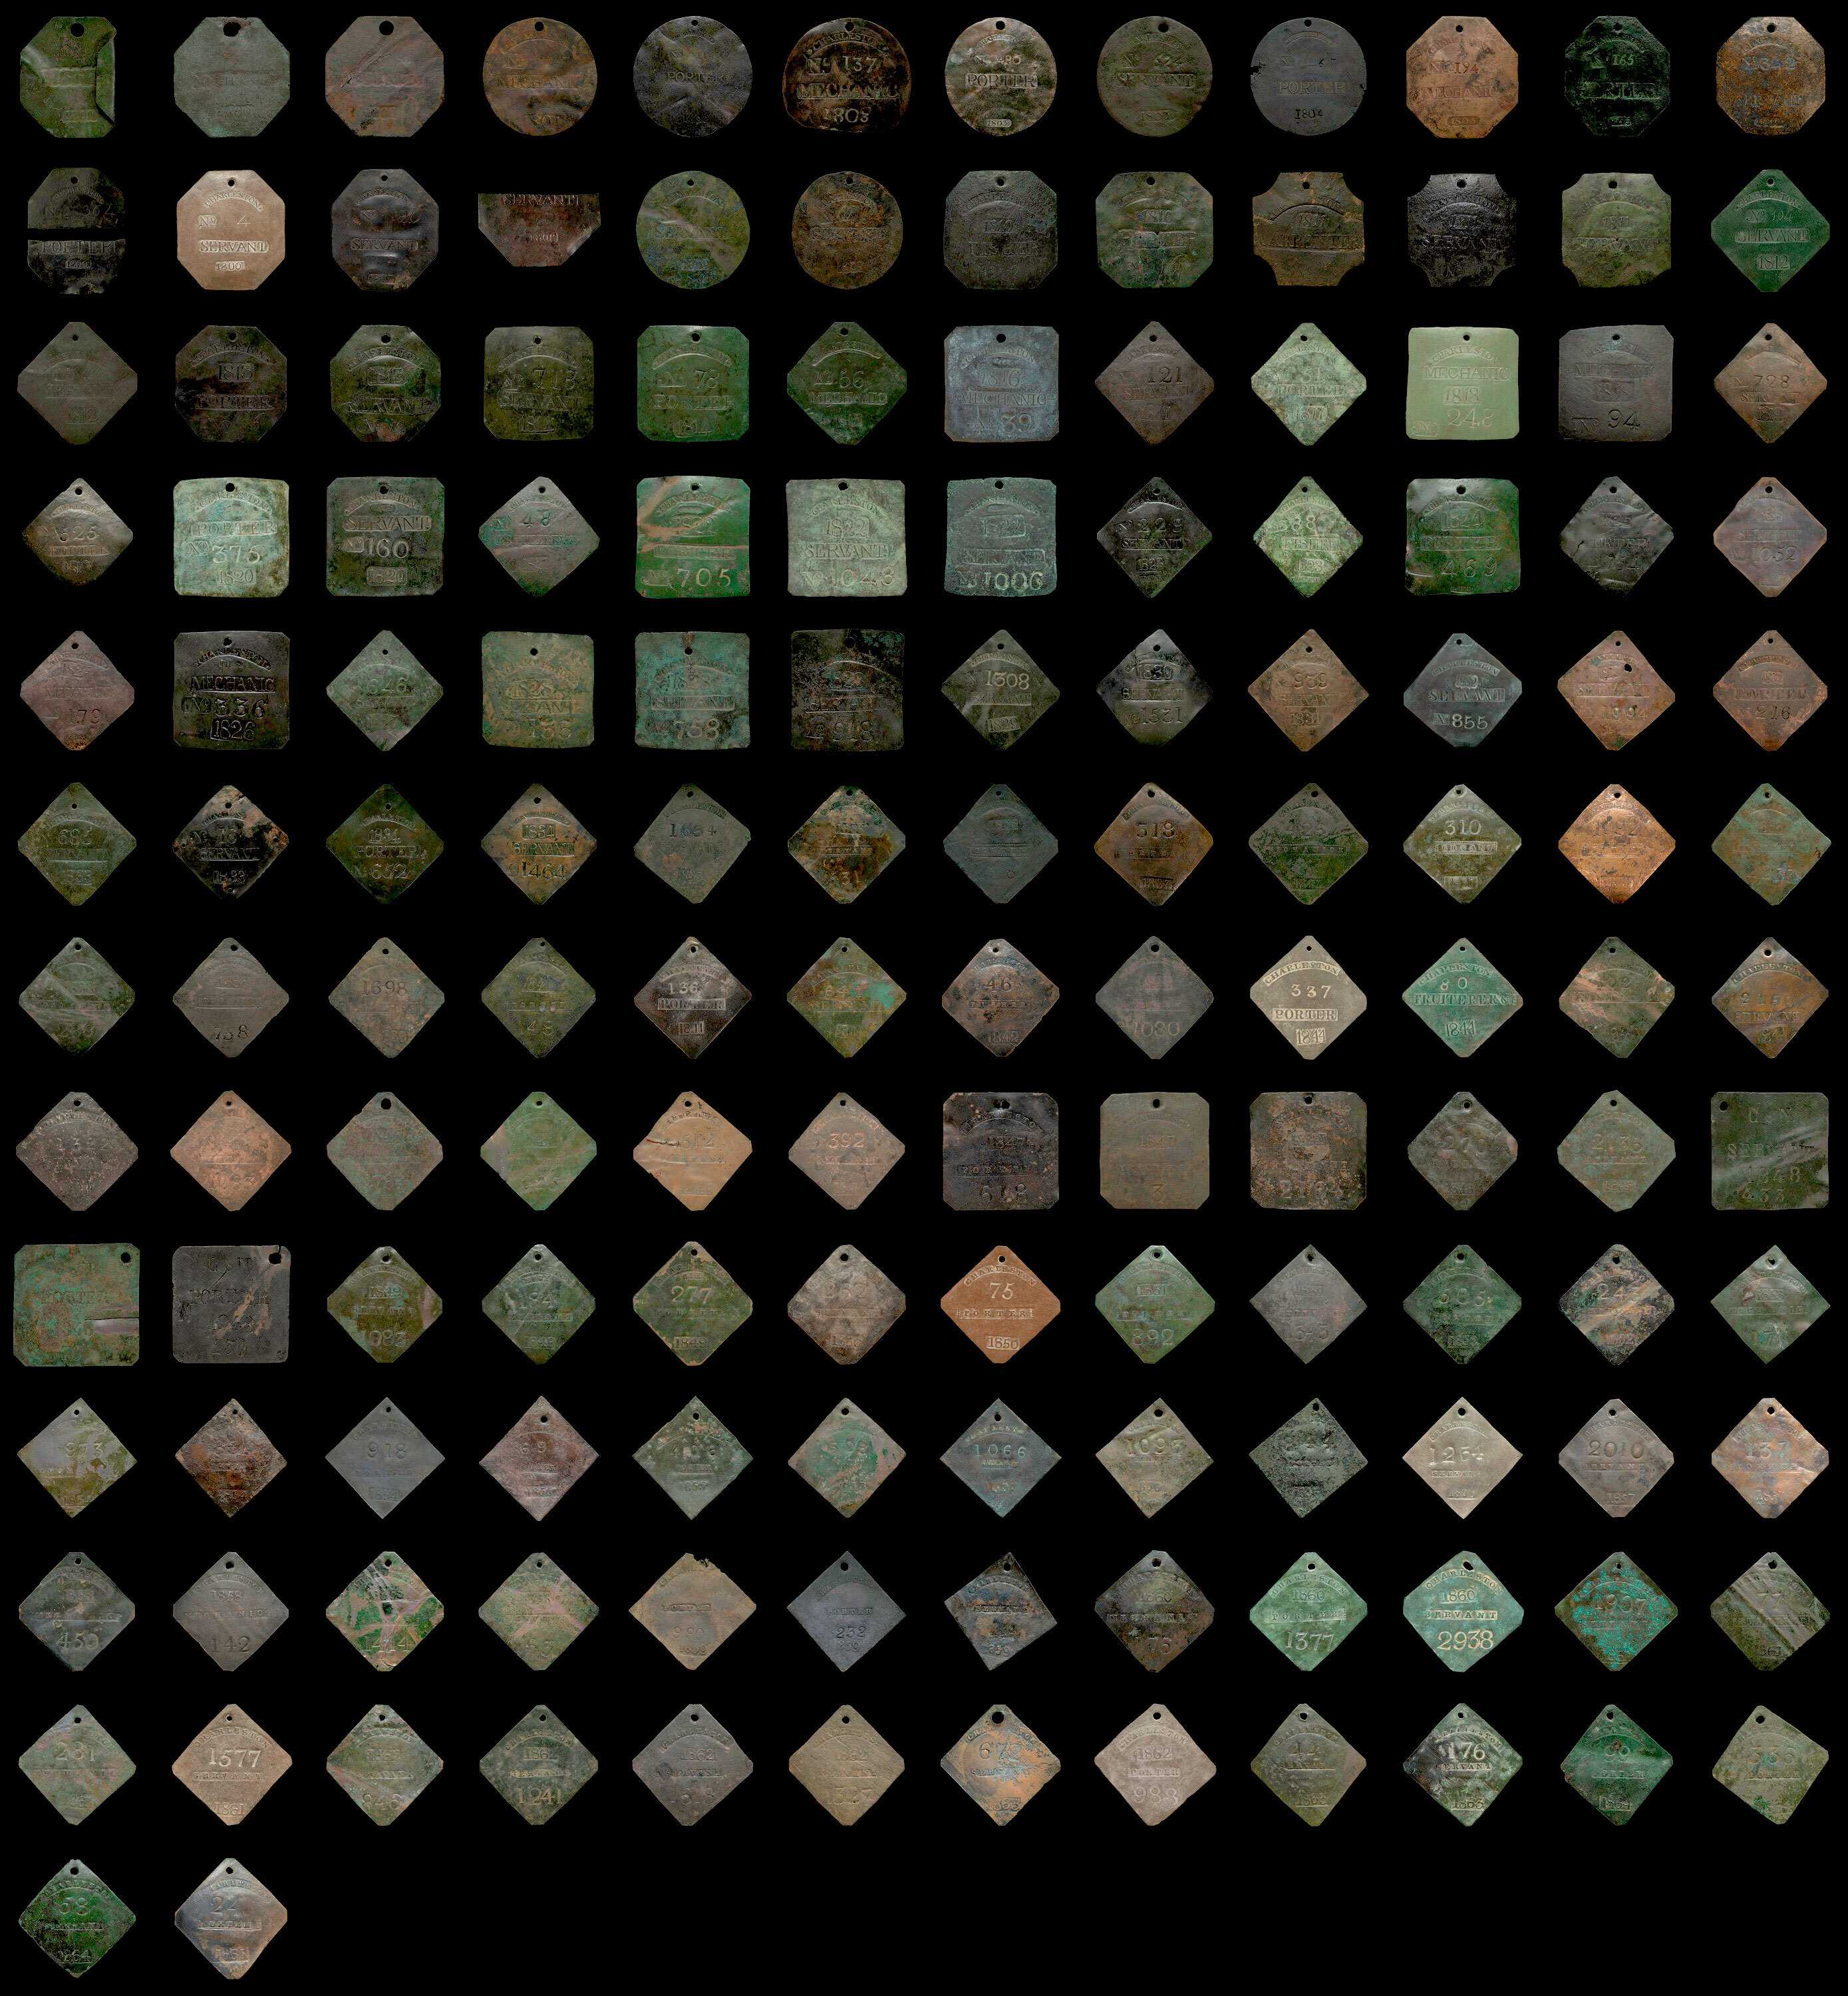 Composite view of 146 slave badges photographed on a black background.  The badges are square, round and diamond shaped.